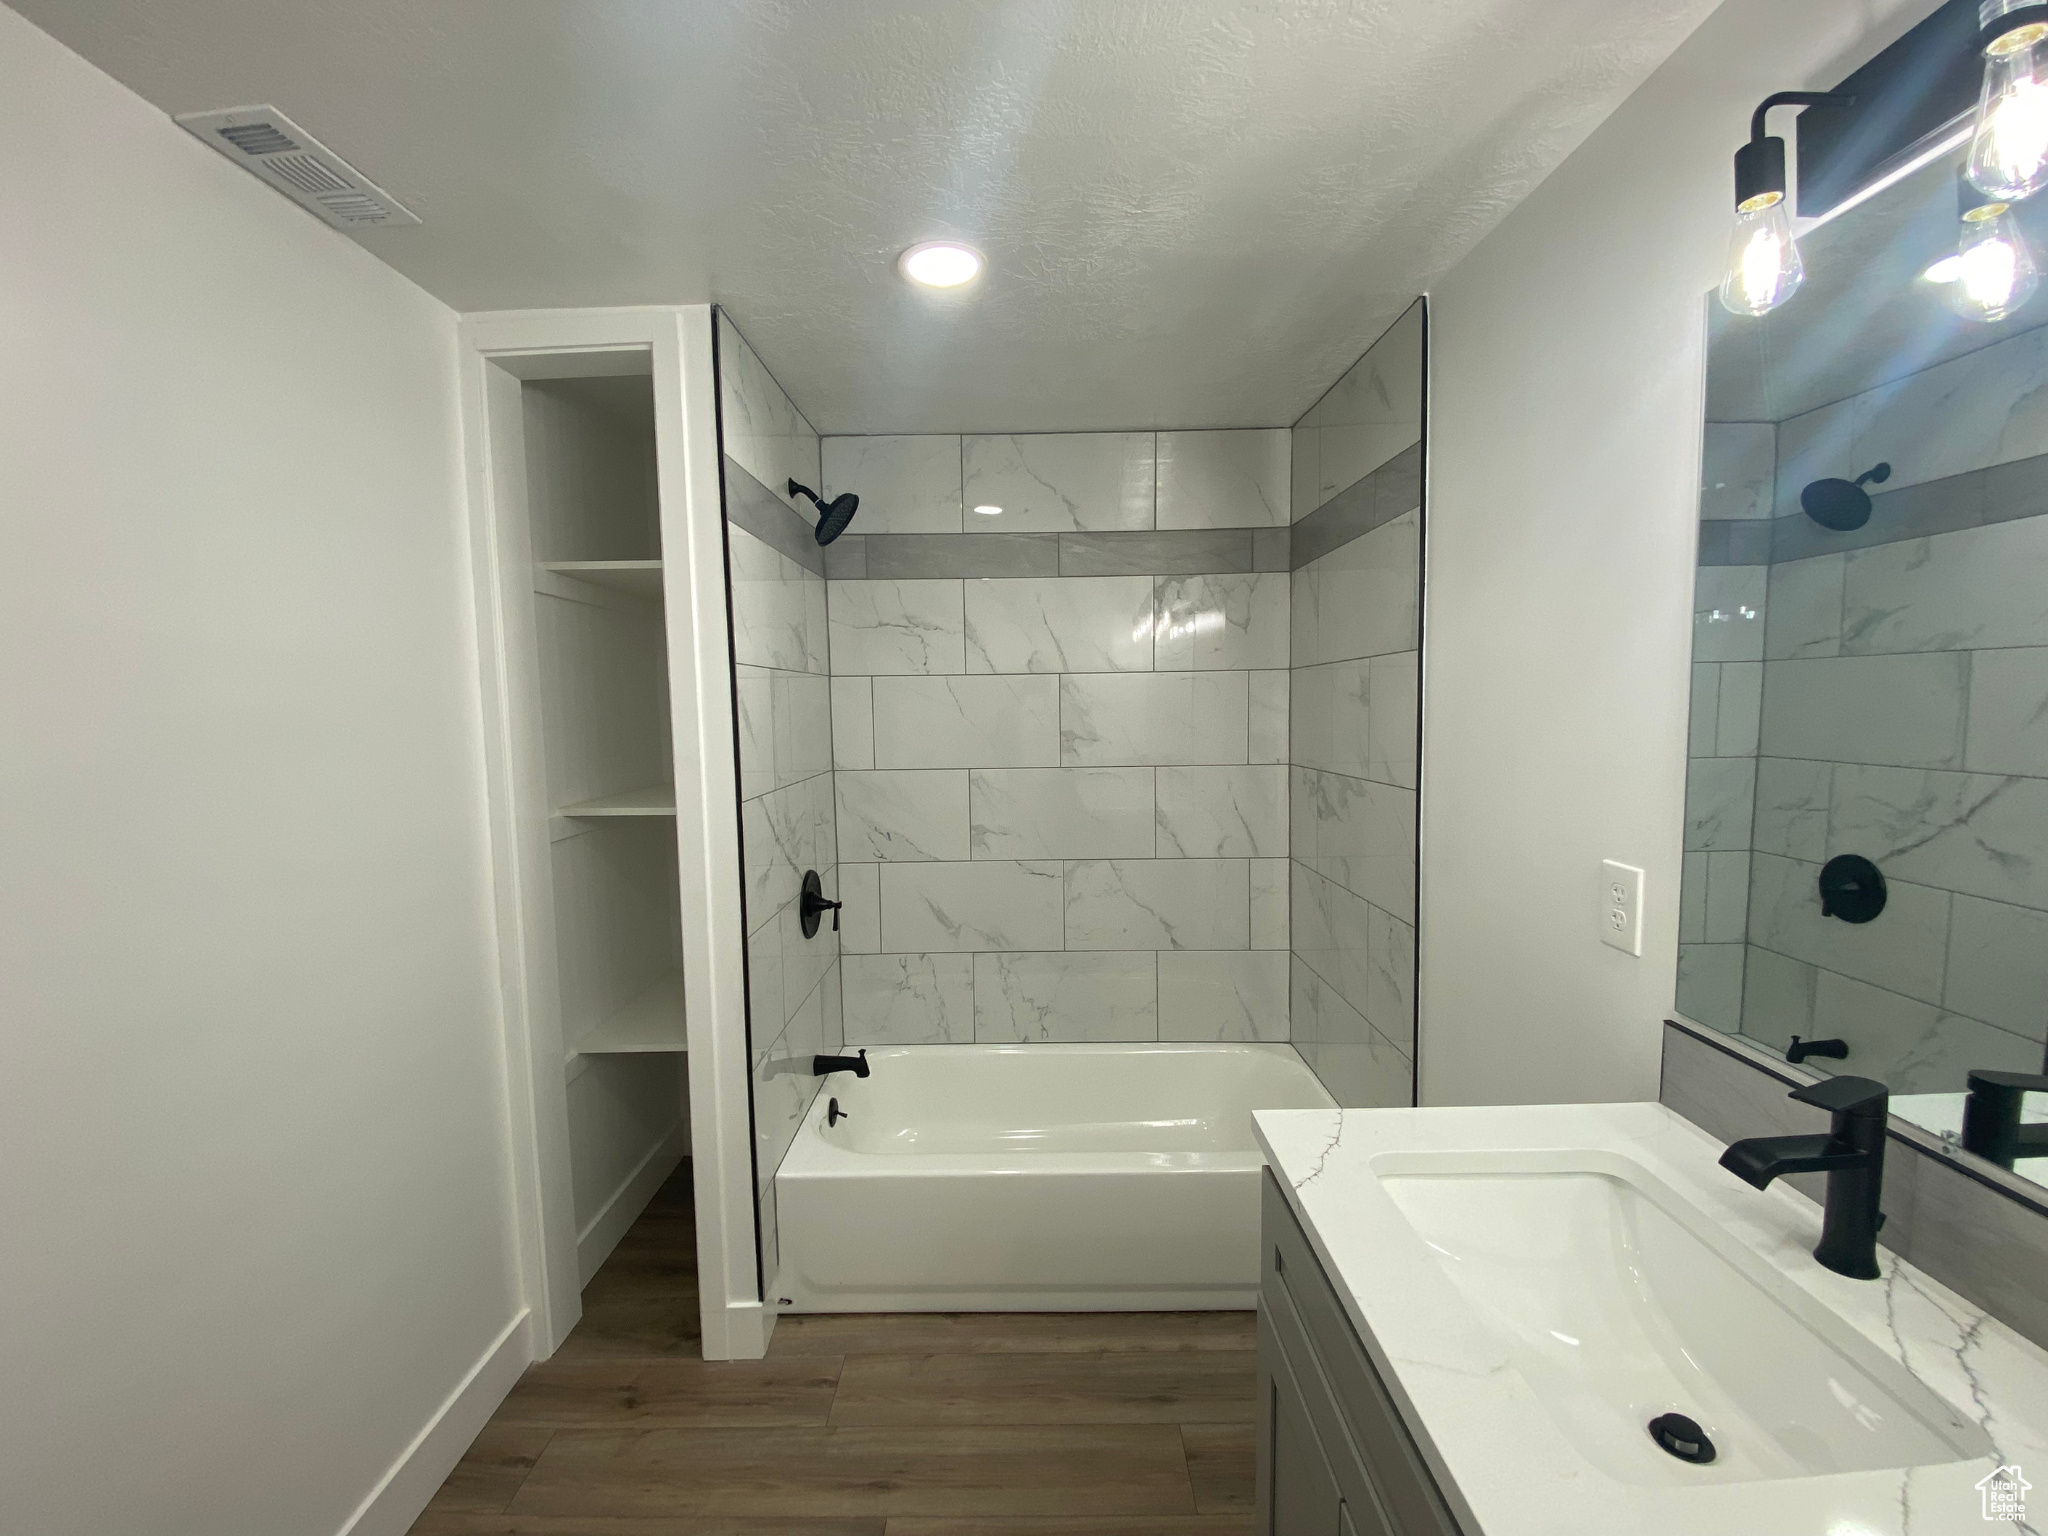 Bathroom featuring wood-type flooring, tiled shower / bath combo, large vanity, and a textured ceiling